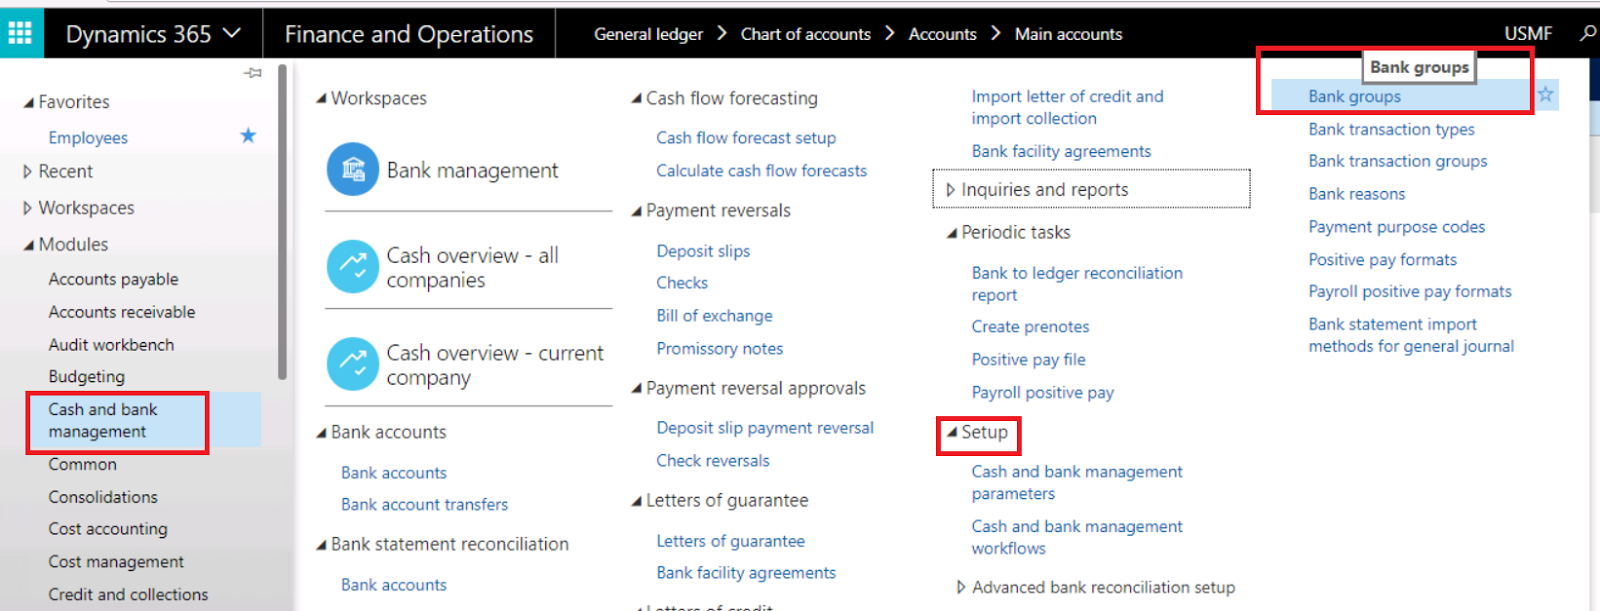 How to create bank account in Dynamics 5? - Dynamics 5 Finance